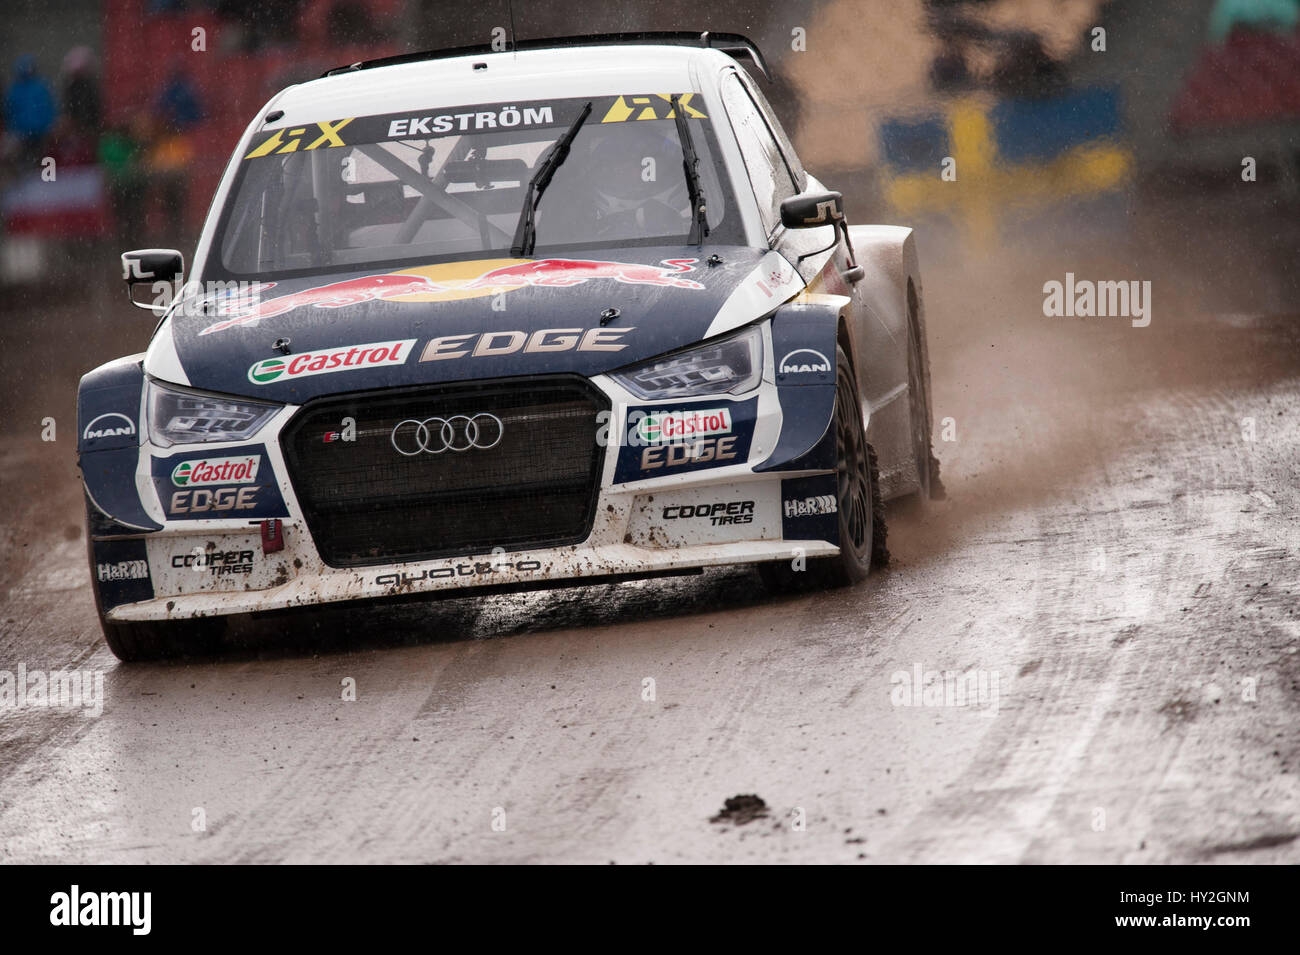 Barcelona, Spain. 1 April, 2017. The Audi S1 car driven by Mattias Ekström, in action during the Round 1 - Rallycross of Barcelona at the Circuit of Catalunya. Credit: Pablo Guillen/Alamy Live News Stock Photo